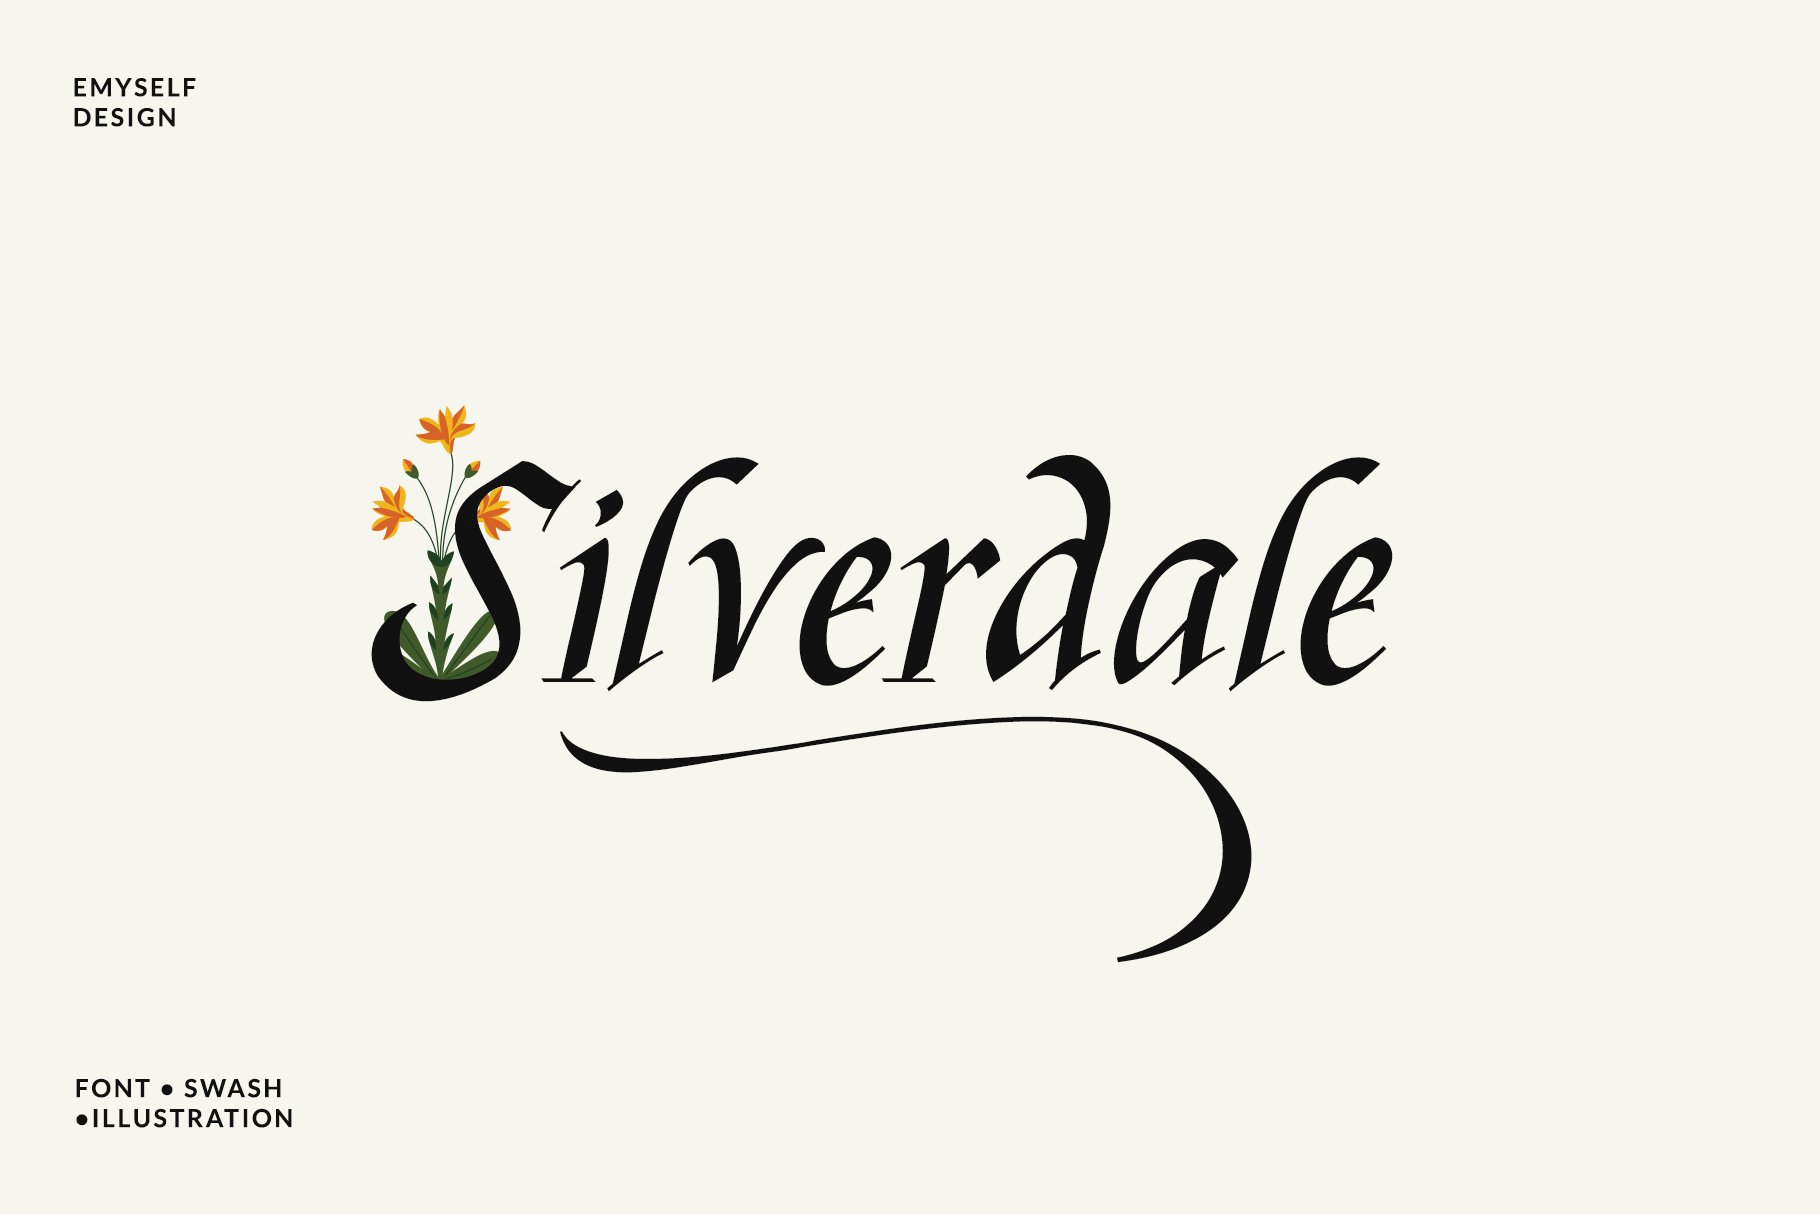 Silverdale Typeface cover image.